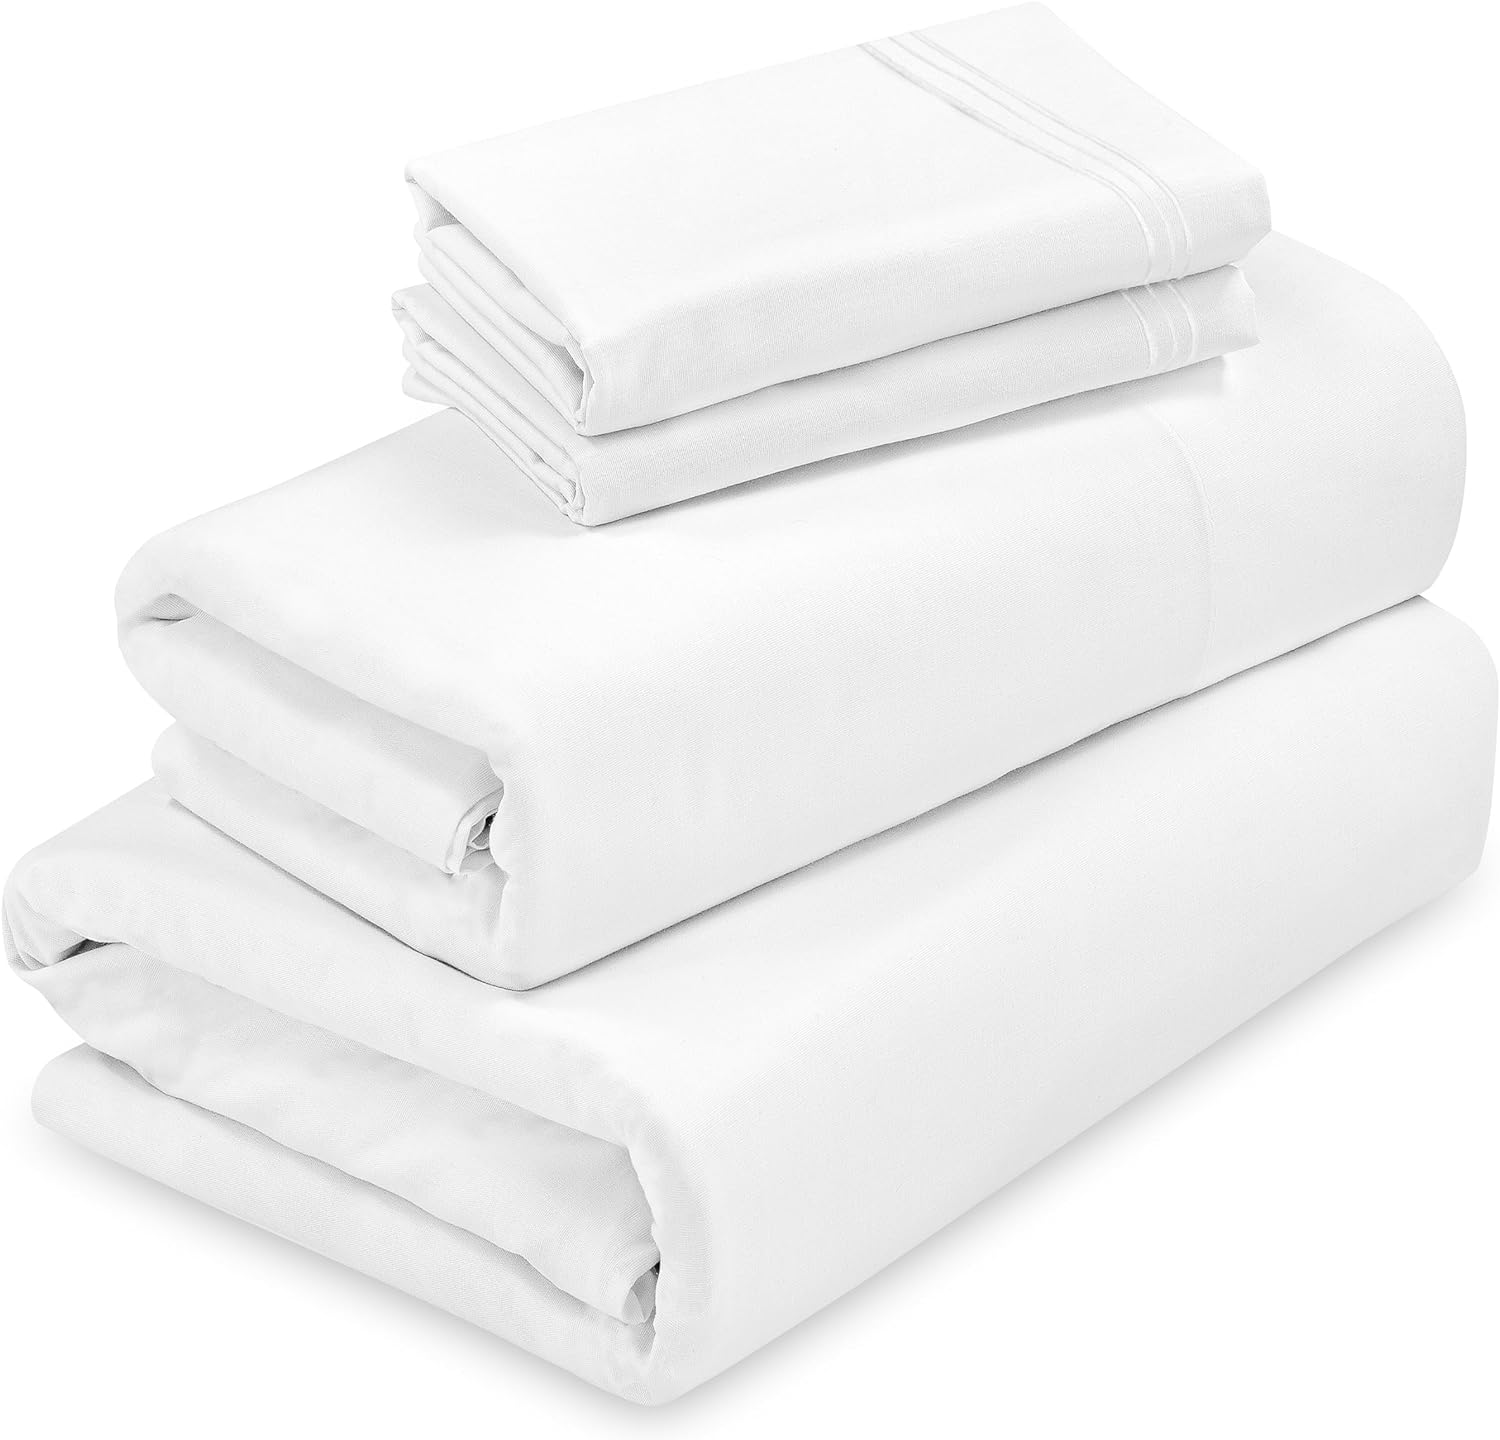 ROYALE LINENS - 3 Piece Twin Bed Sheet - Soft Brushed Microfiber 1800 Bedding Set - 1 Fitted Sheet, 1 Flat Sheet, 1 Pillow case - Wrinkle & Fade Resistant Luxury Twin Size Sheet Set (Twin, White)